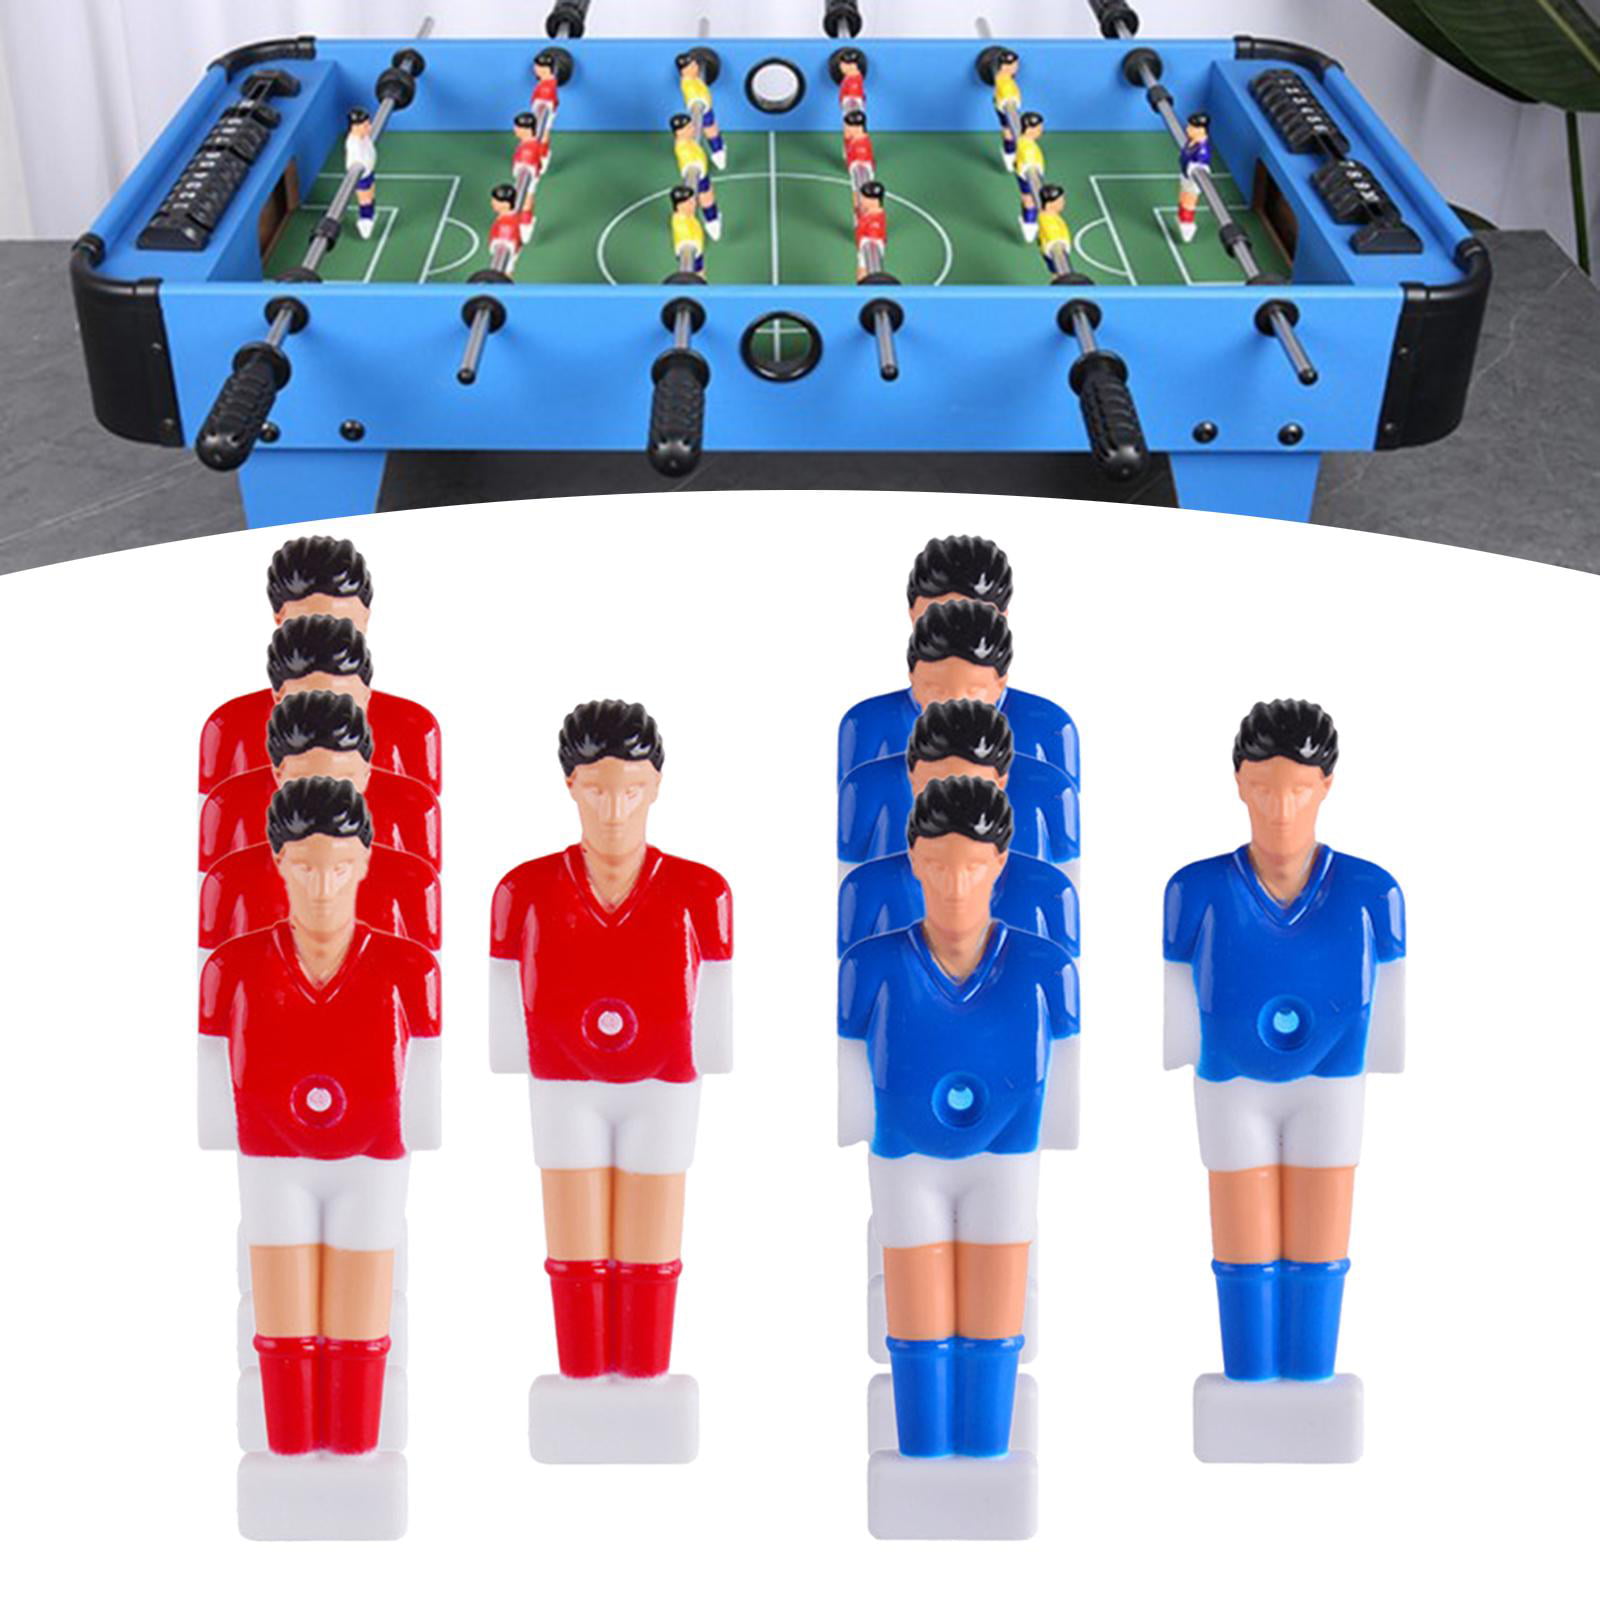 Table Football Man Replacements Table 11Pcs Durable Ball Player Entertainment for Football Game 1.4M Table Soccer Ball Player 